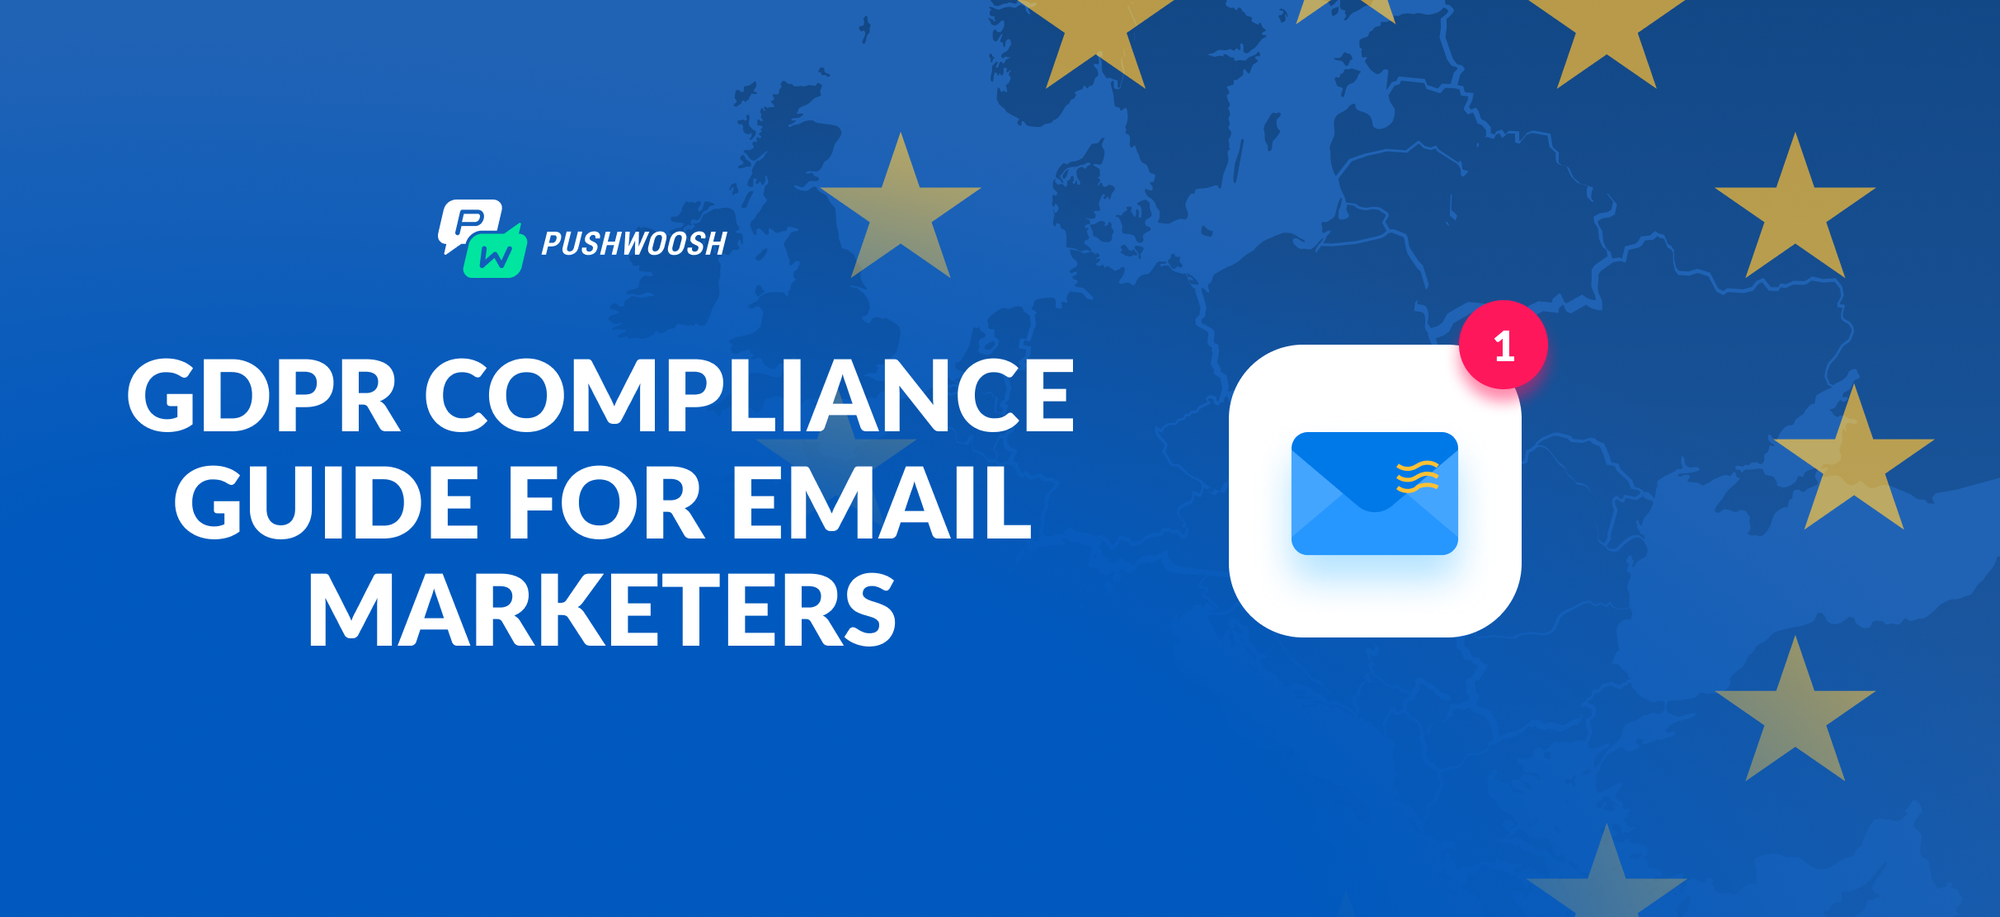 How to Send Emails and Stay GDPR Compliant with Pushwoosh